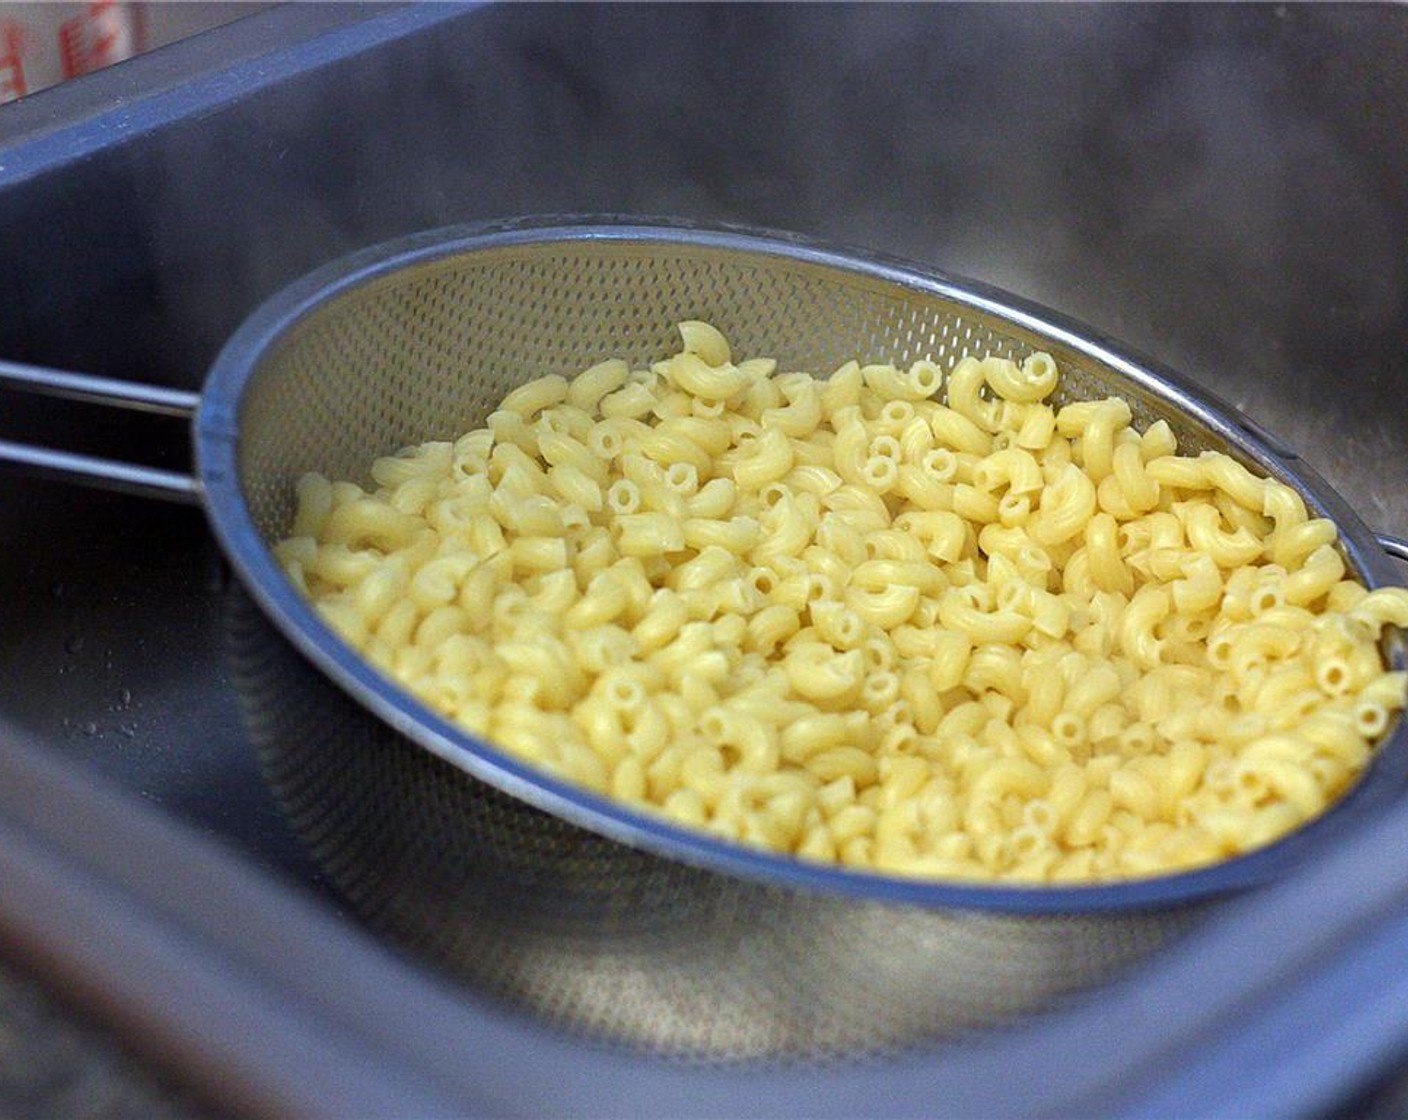 step 7 When the pasta is cooked to al dente, drain into a colander but do not rinse. The starch from the cooking water will help the cheese sauce to stick to the noodles. Return noodles to the pot and cover until the cheese sauce is ready.